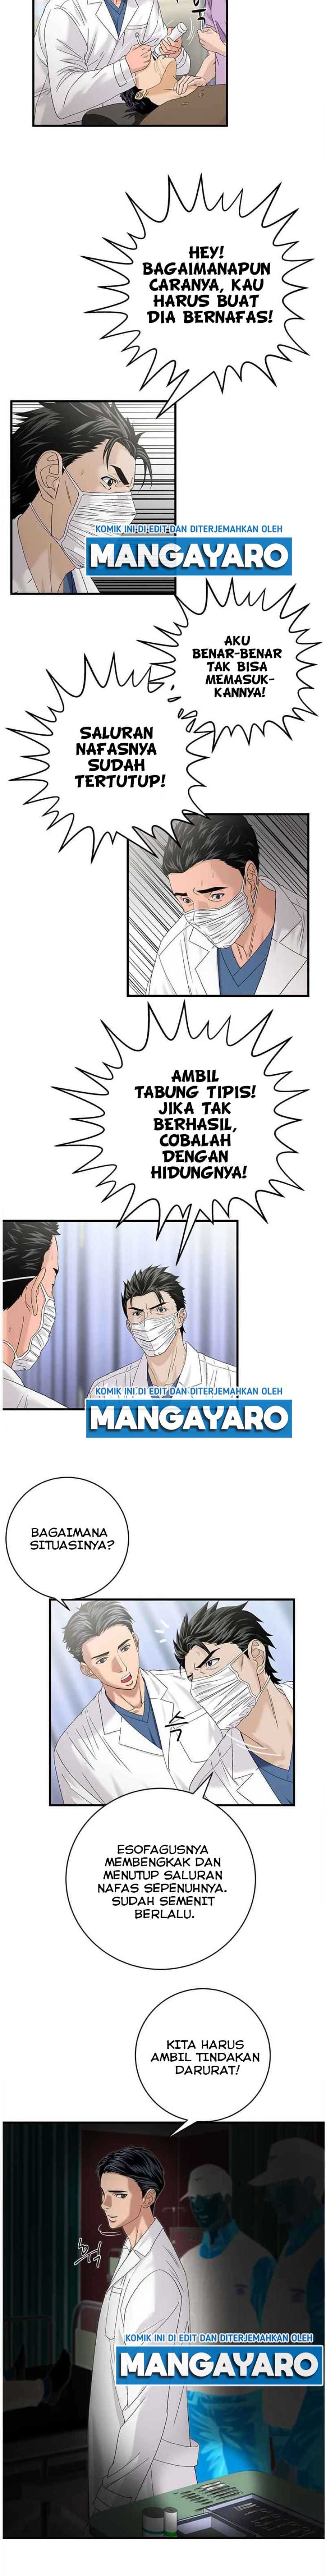 Dr. Choi Tae-Soo Chapter 70